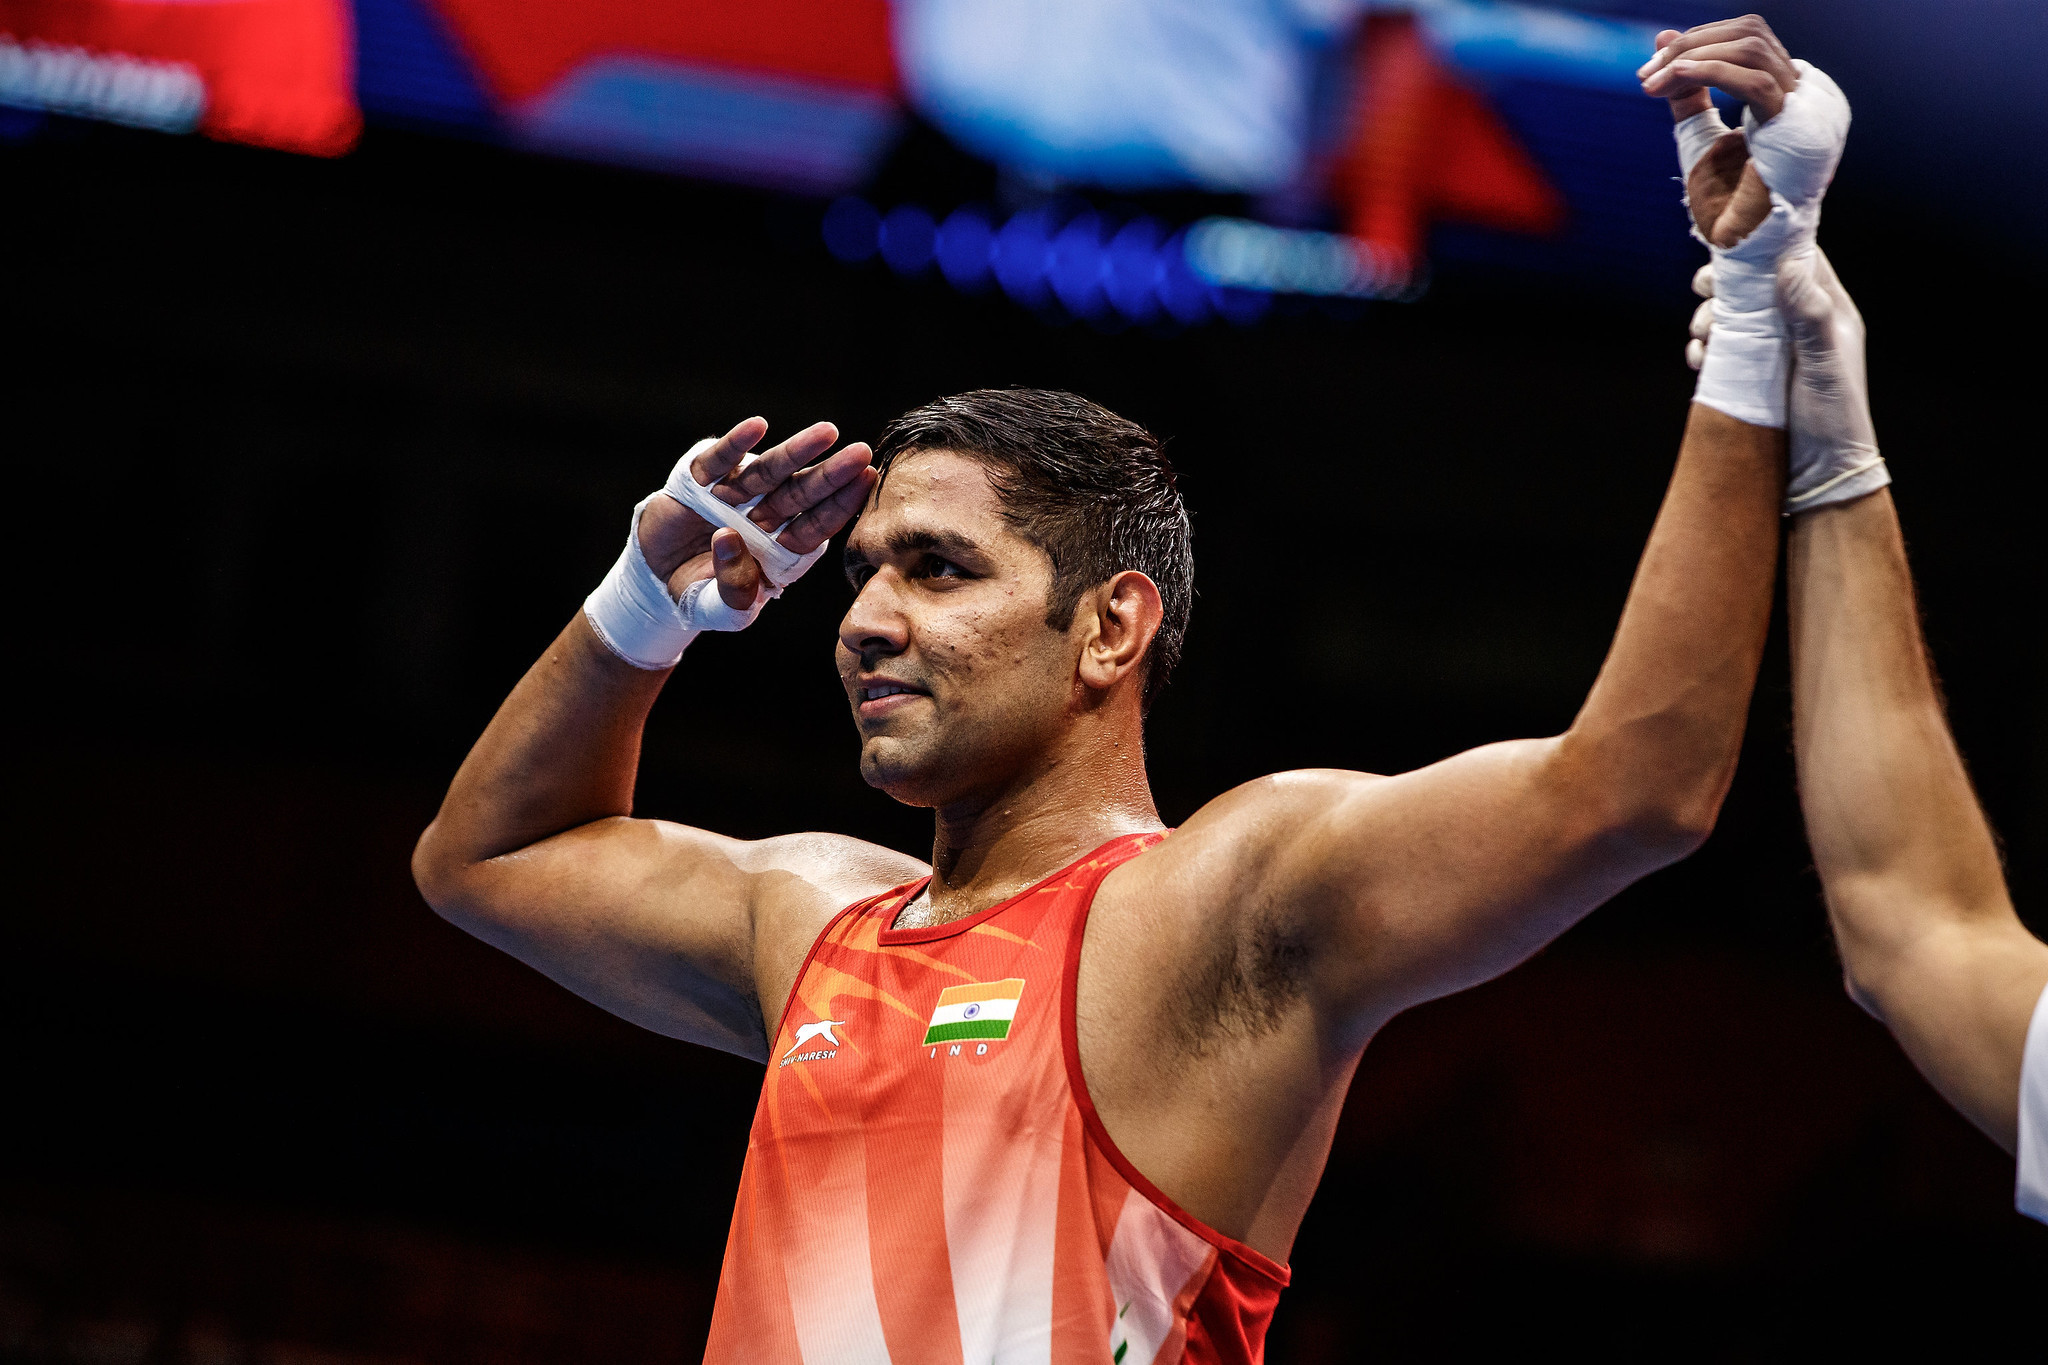 India's Narender gave his traditional salute celebration after another victory in the over-92kg division ©AIBA